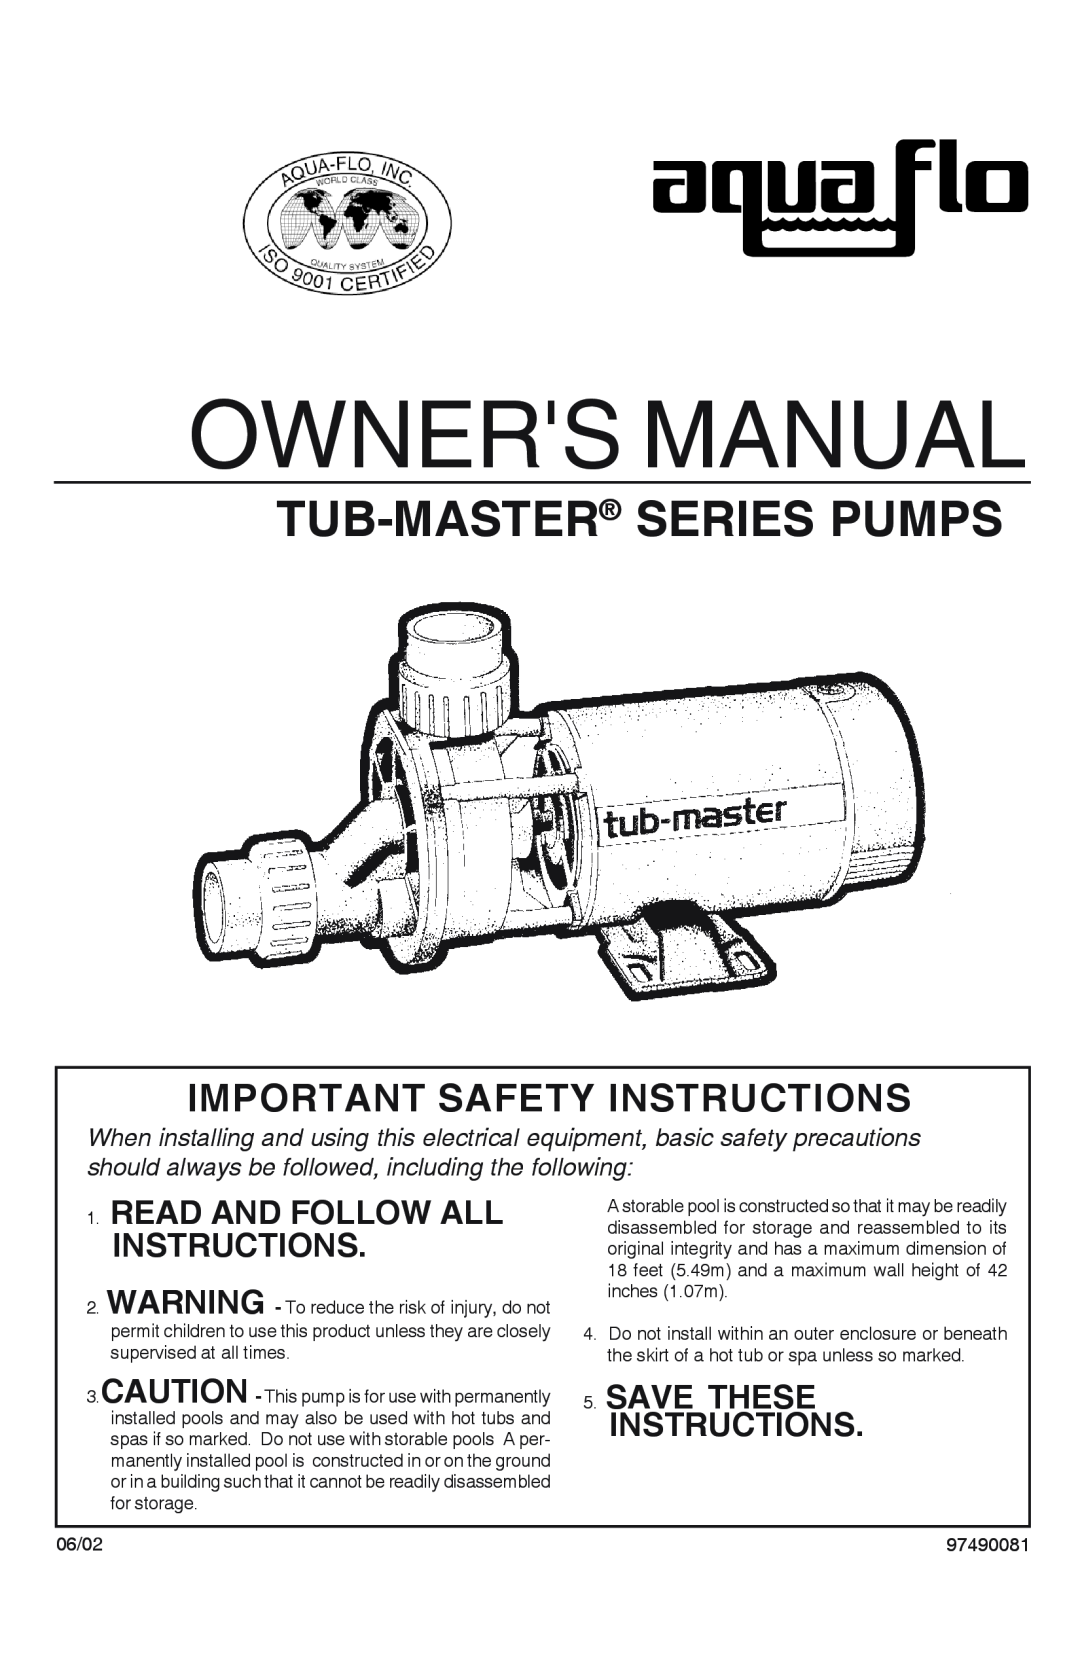 Aqua Flo Tub-Master Series owner manual Read And Follow All Instructions, Save These Instructions, Owners Manual 